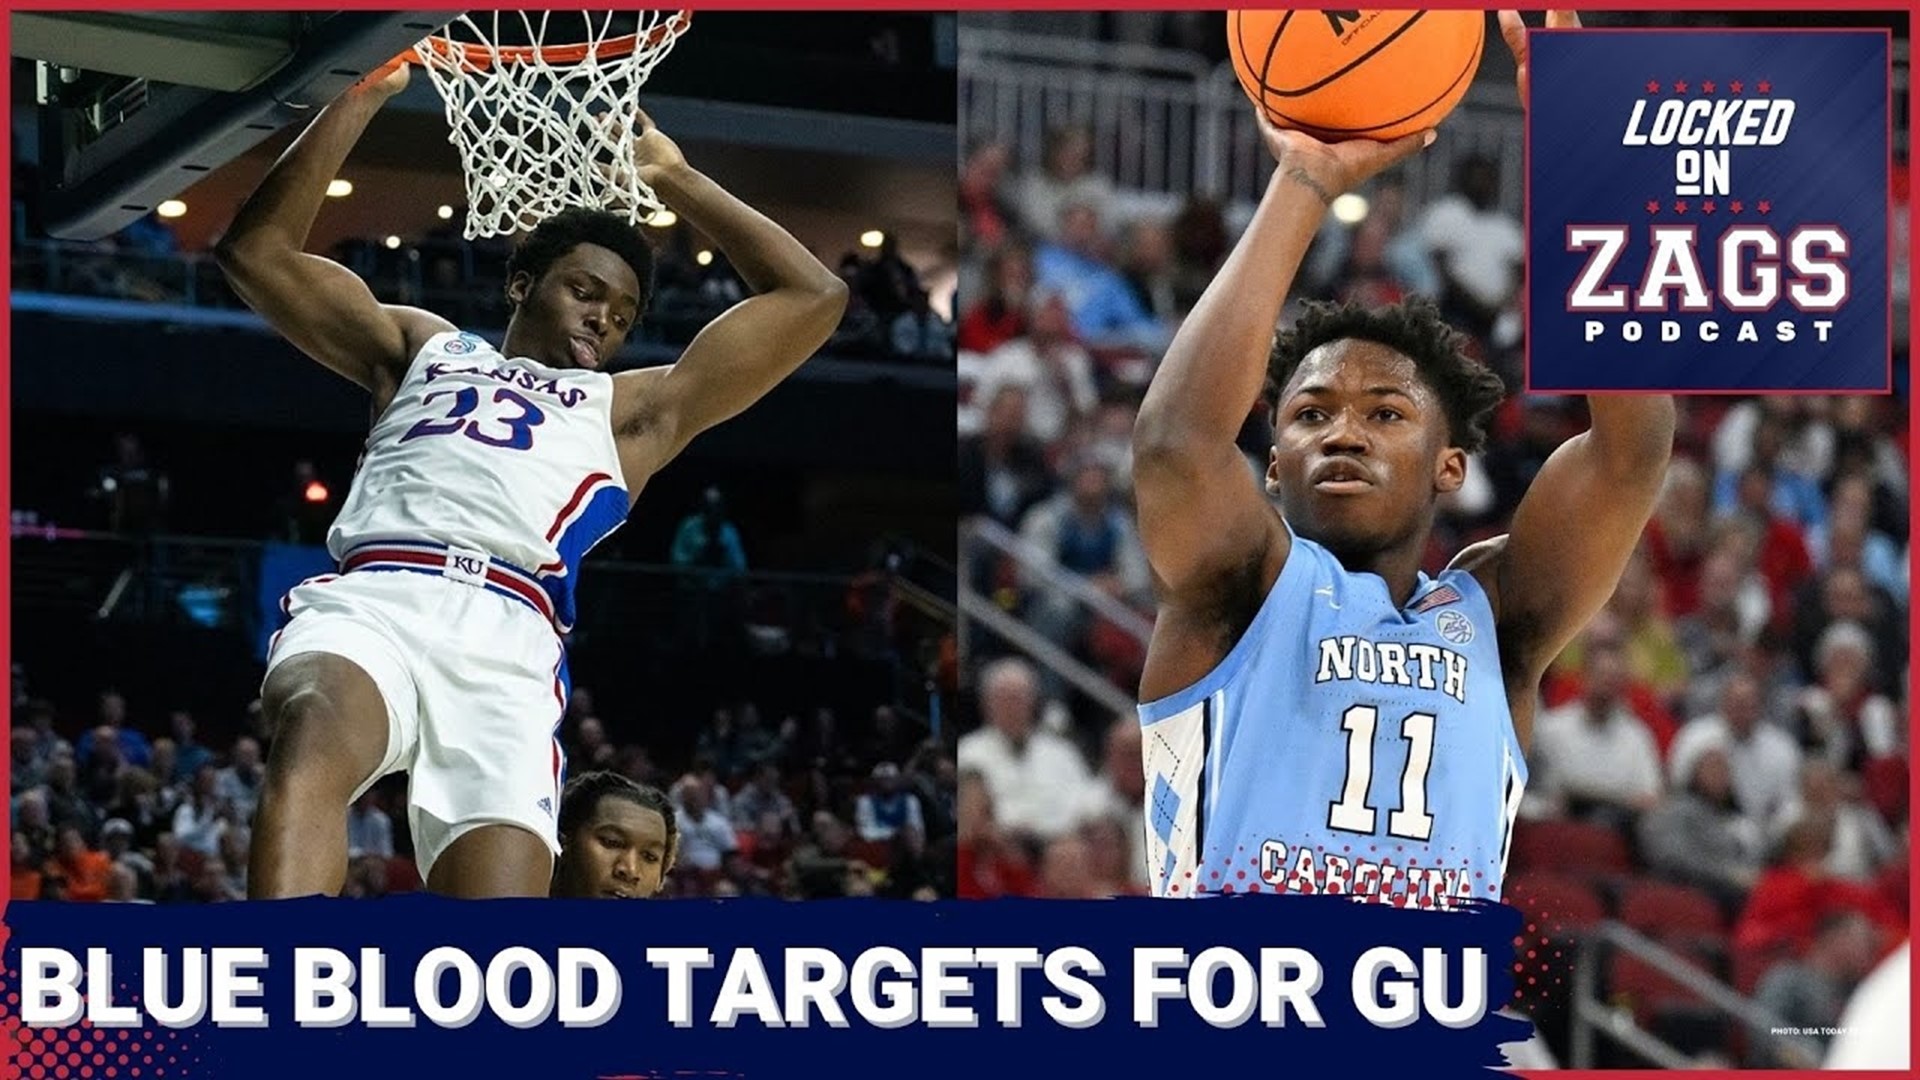 The NCAA transfer portal is alive and well, and the blue blood programs like Kansas and North Carolina are watching talented former top 100 prospects hit the portal.